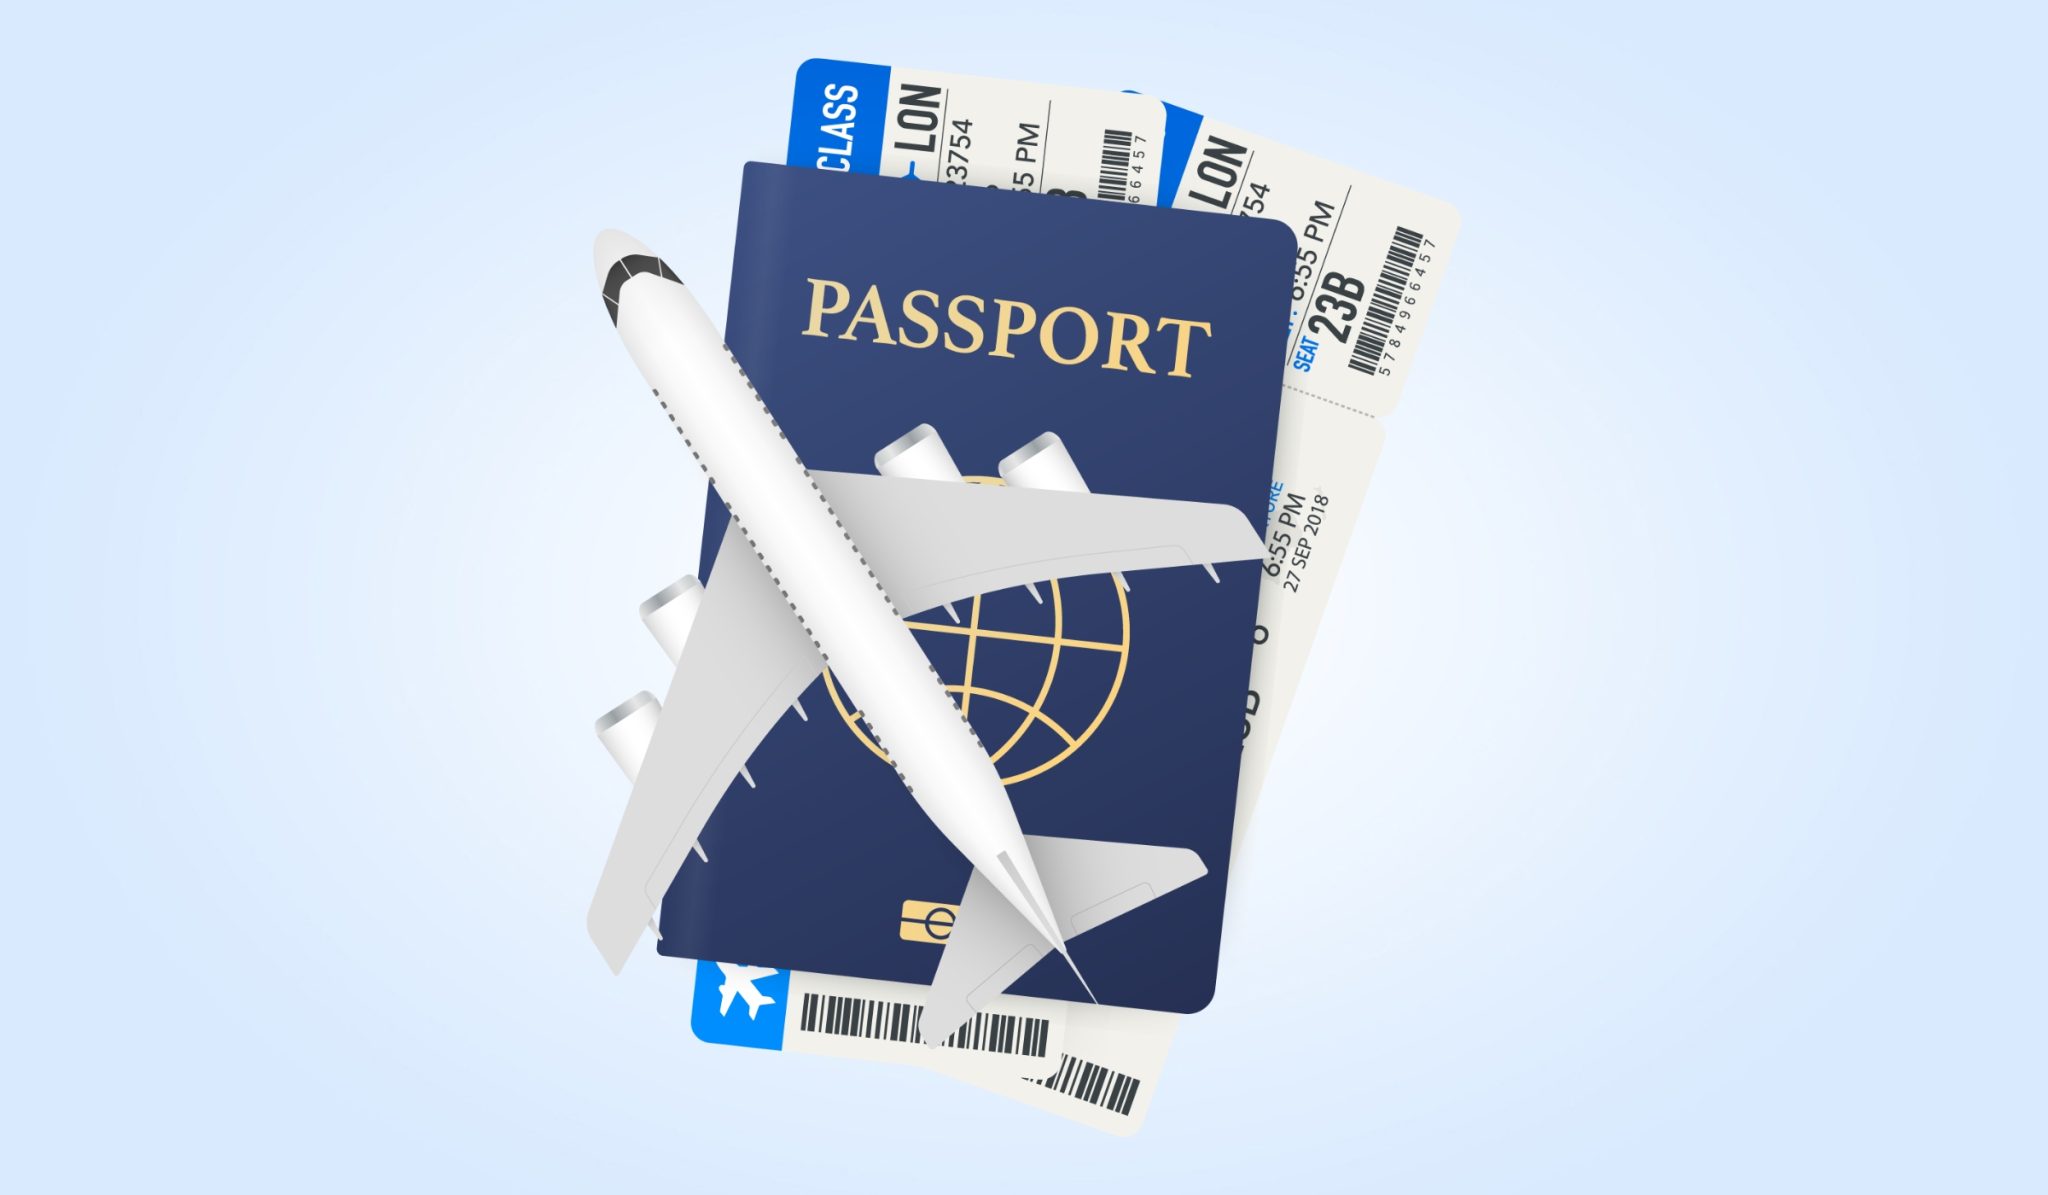 Do You Need ID For Domestic Flights in Australia? TravelTips